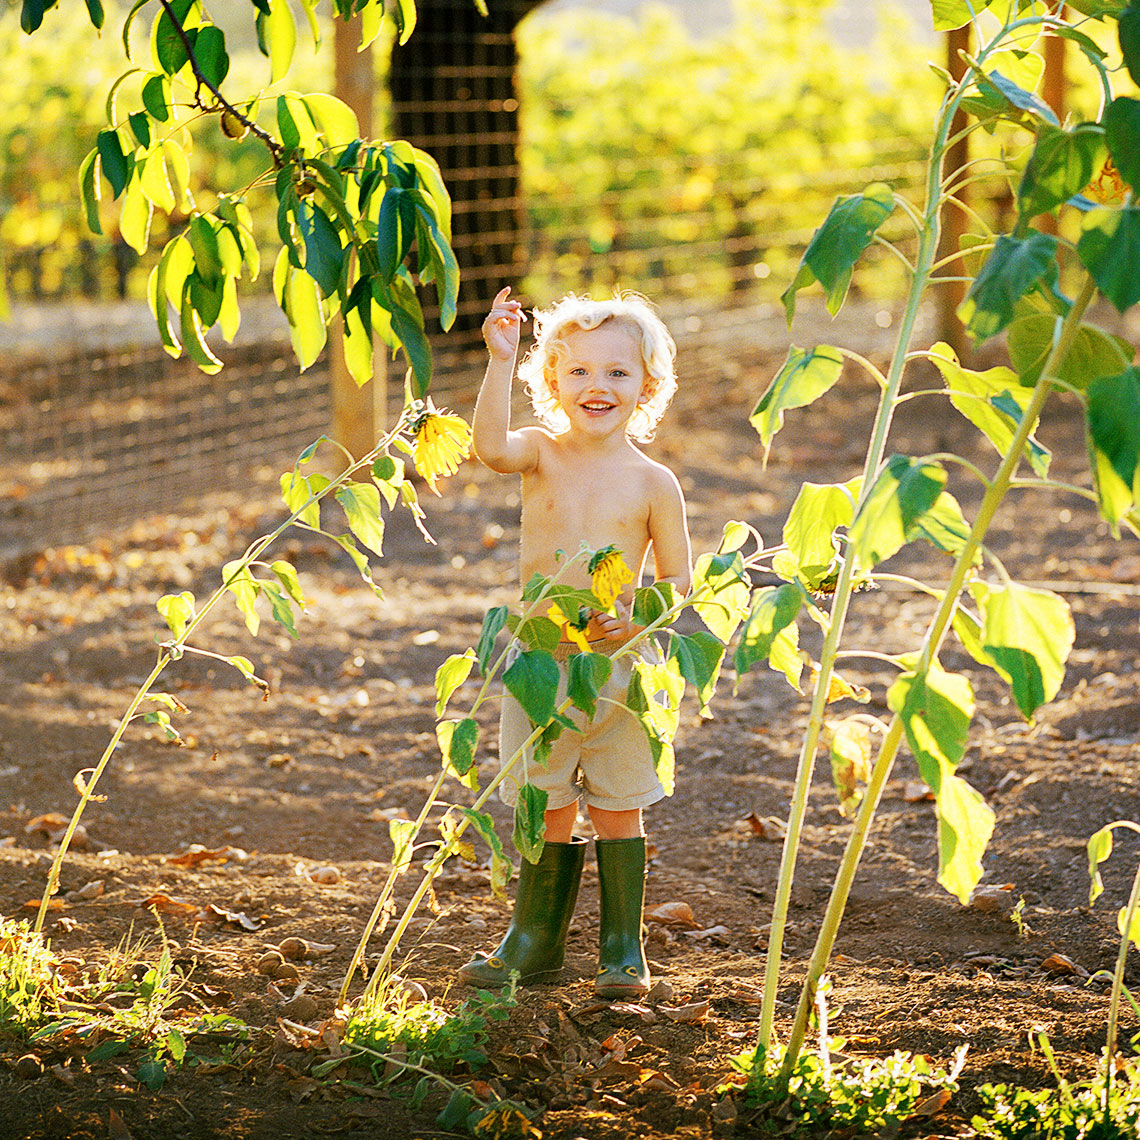 Children portrait of boy standing in frog run boots in a Sunflower garden next to a vineyard in Napa California by John Derryberry Photography